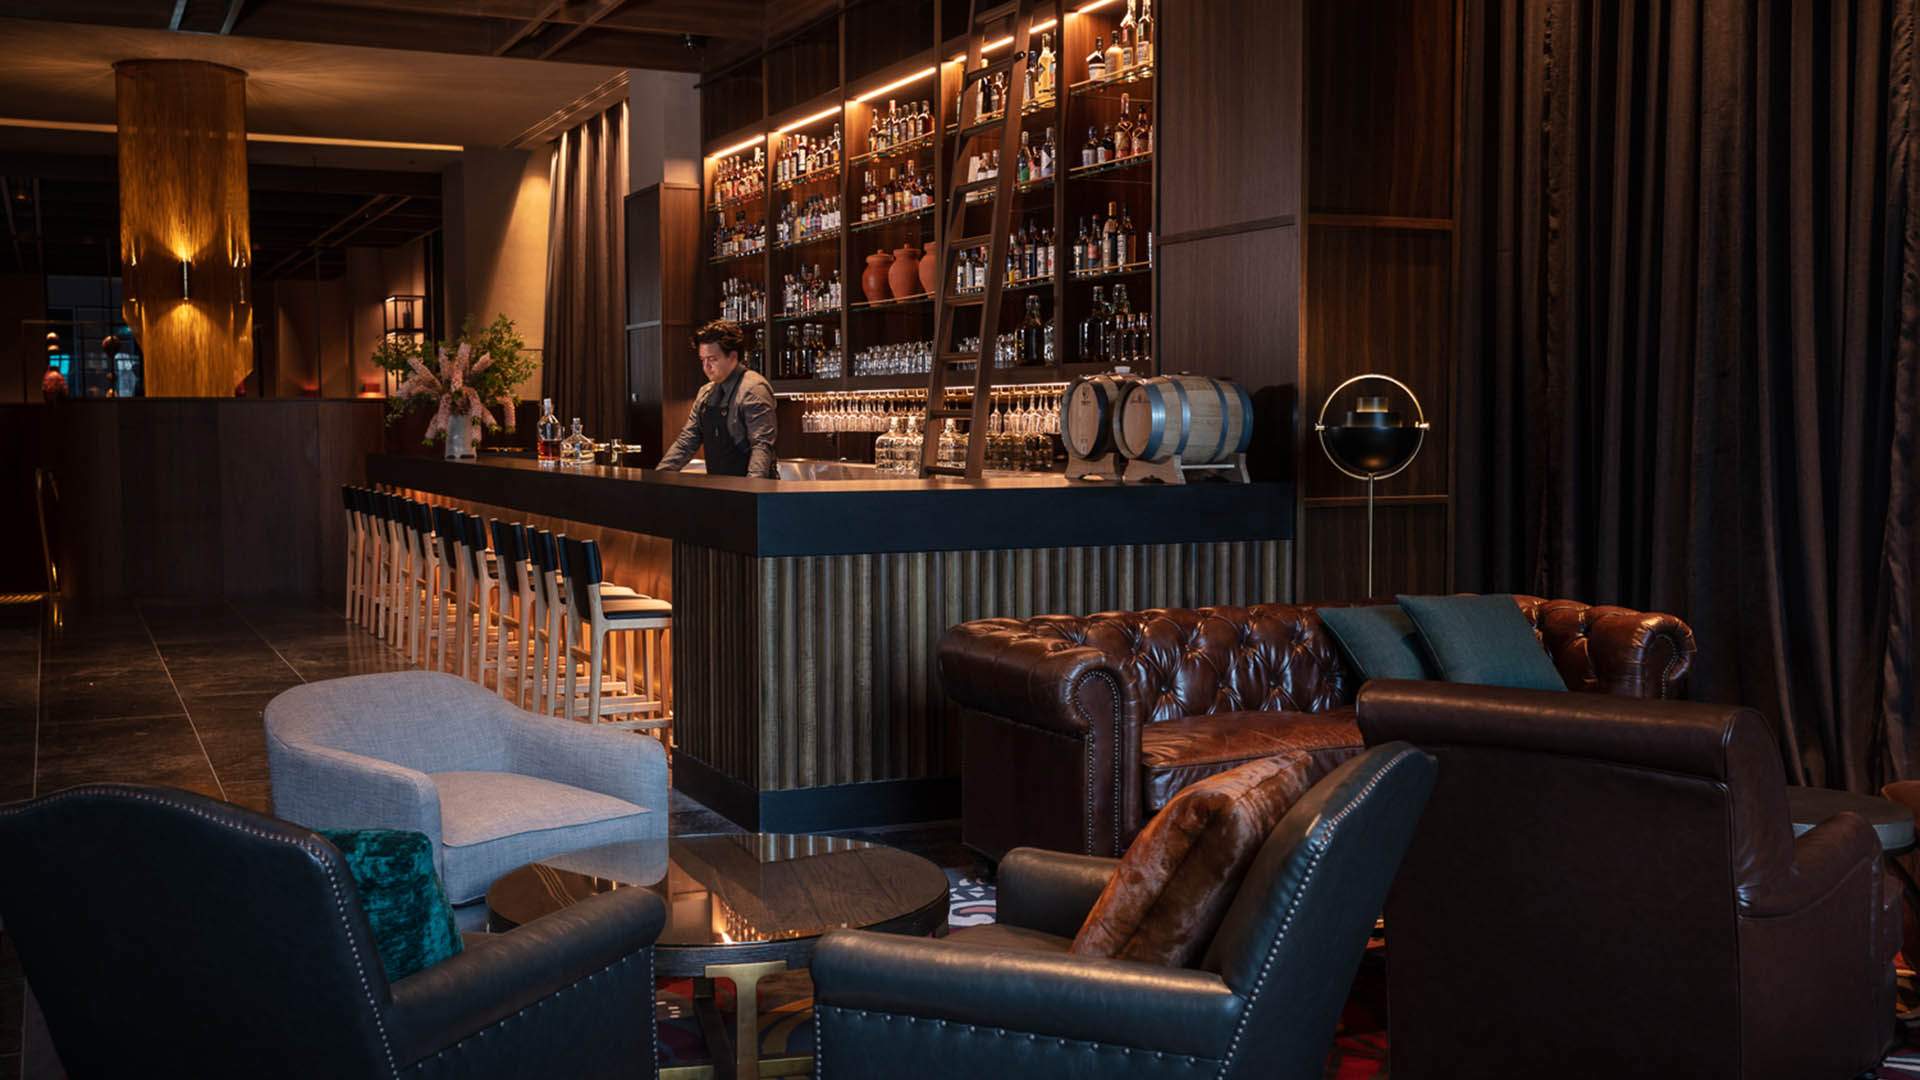 Next Melbourne Is the Soon-to-Open Inner City Hotel That'll Barrel Age Its Spirits Onsite